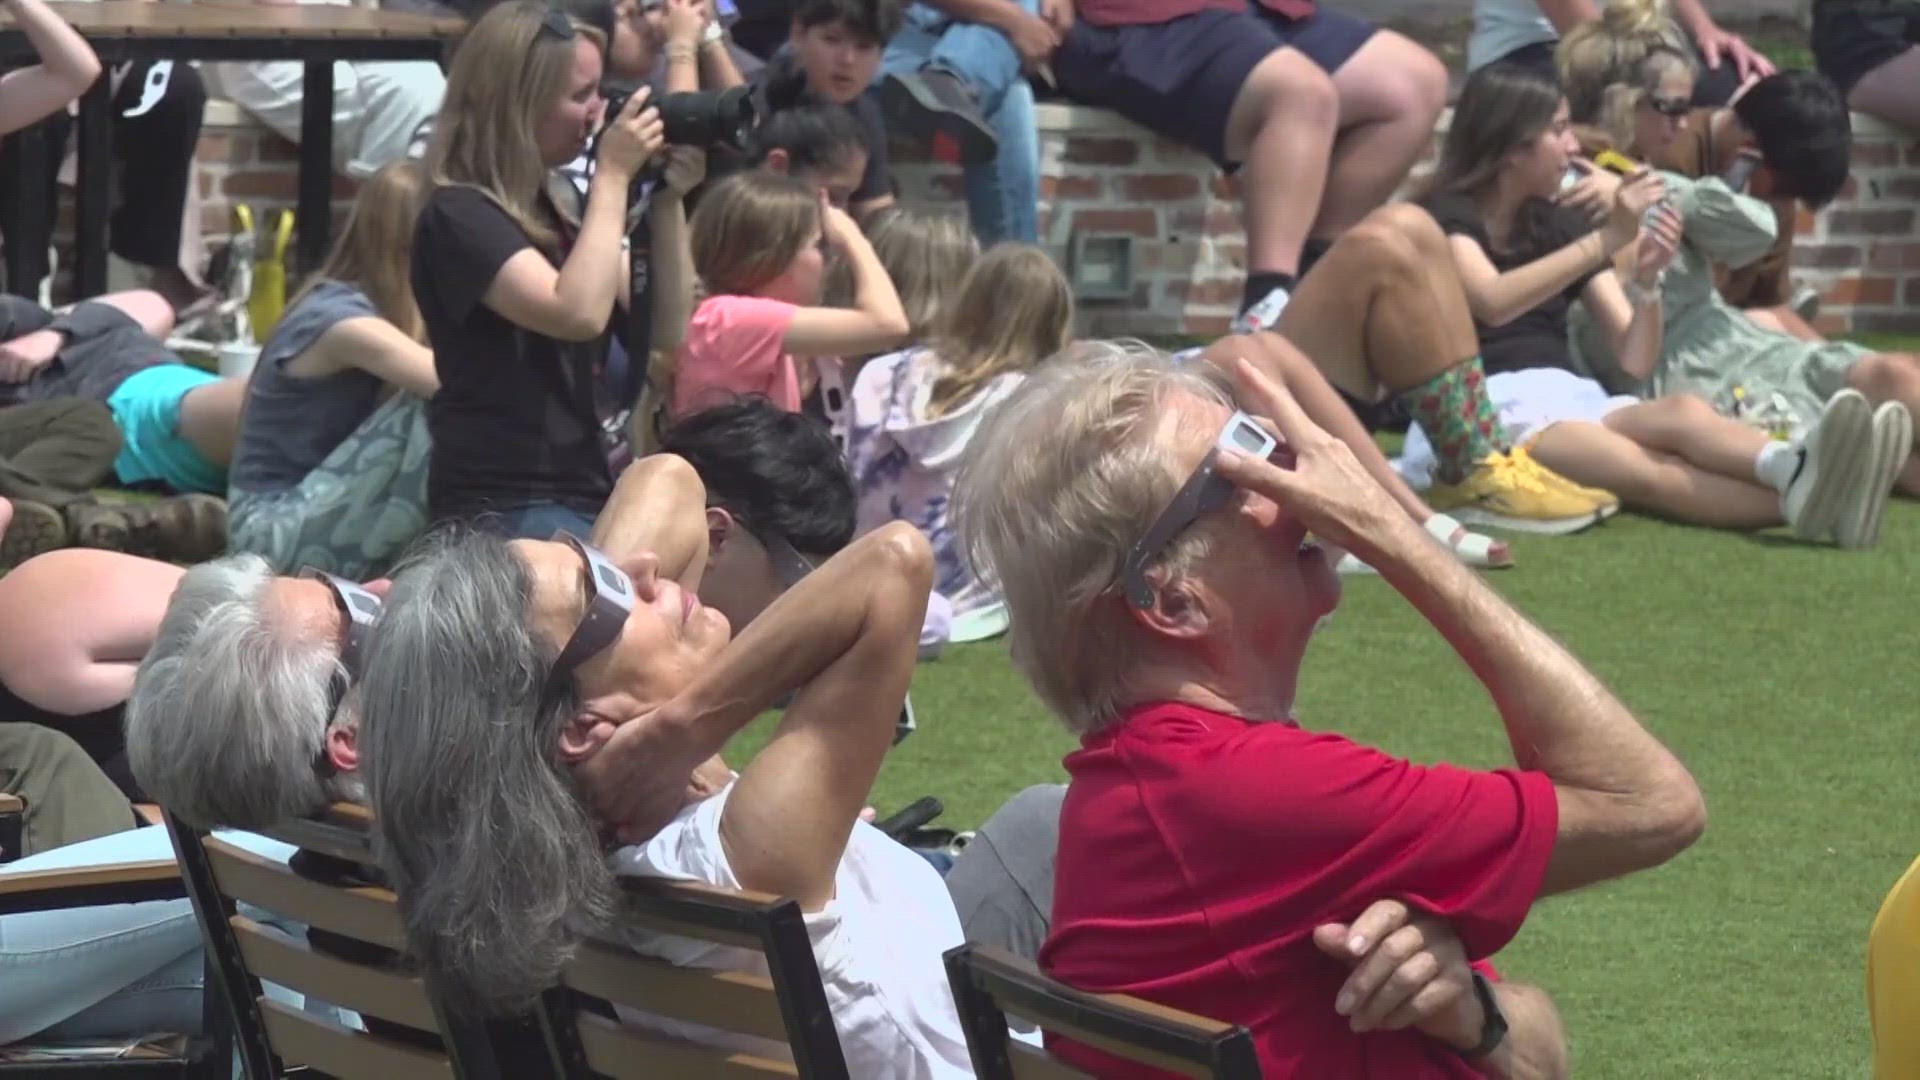 Despite the eclipse only reaching 98% totality in the BCS, a crowd of College Station residents from all walks of life came together to experience the eclipse.